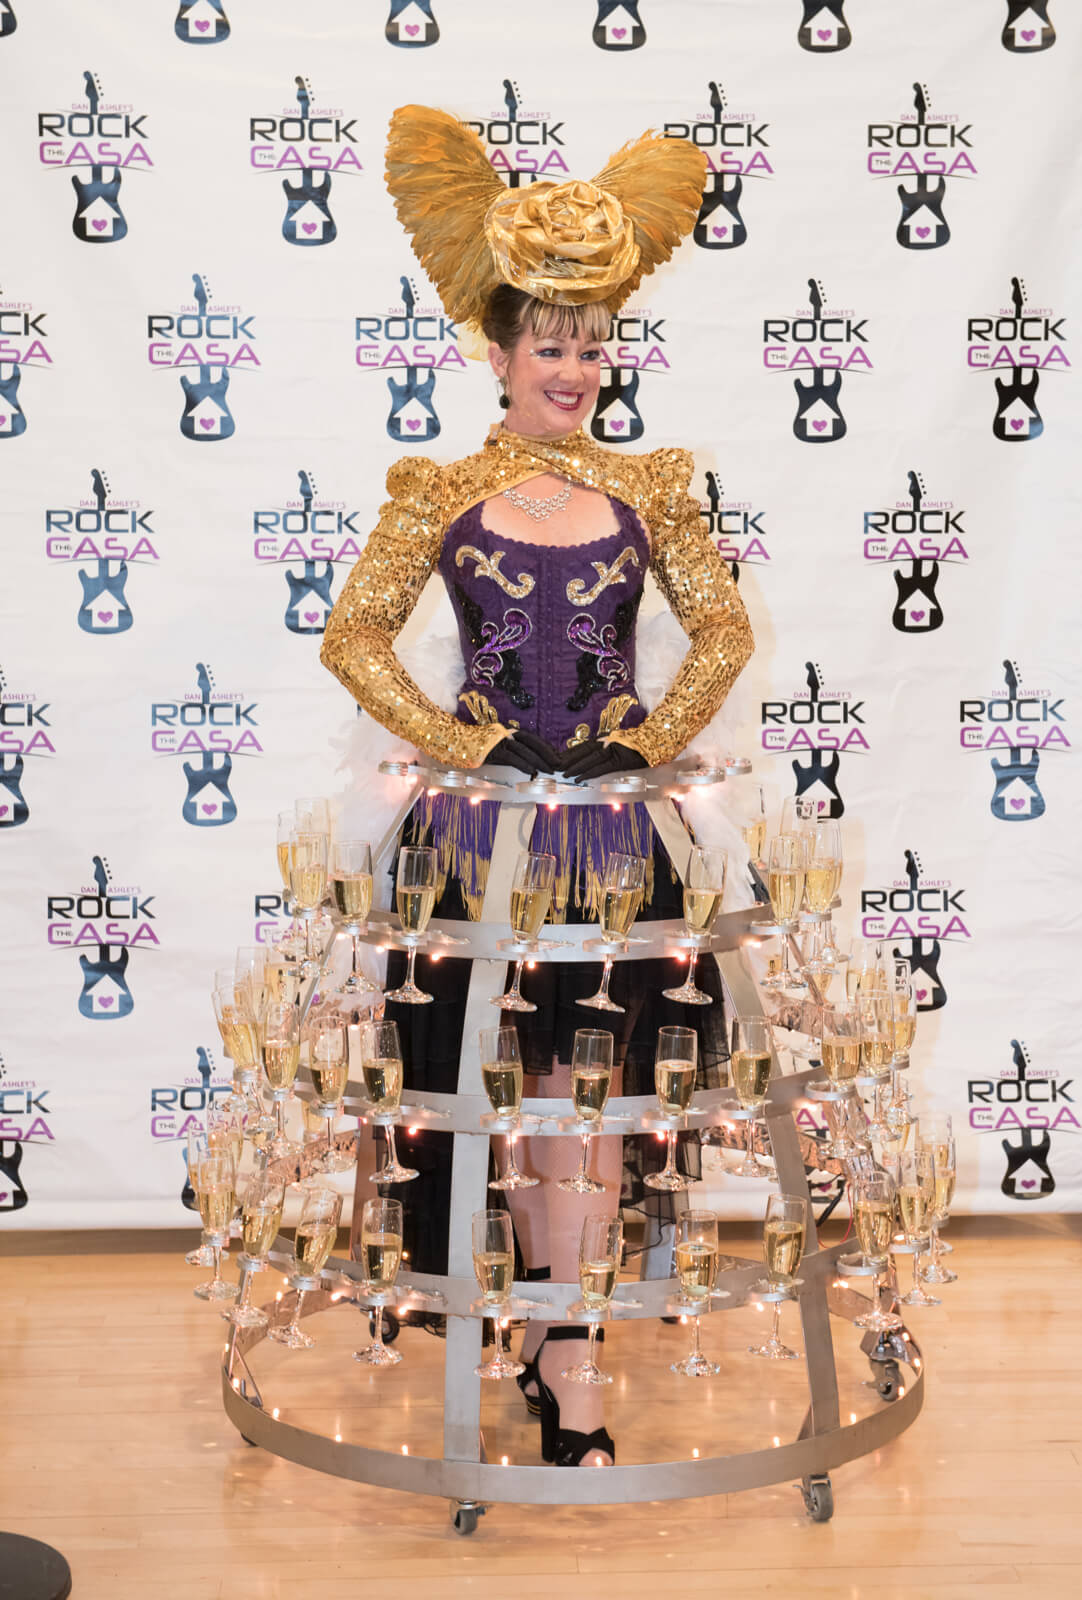 Woman at event dressed in dress made of champagne glasses.